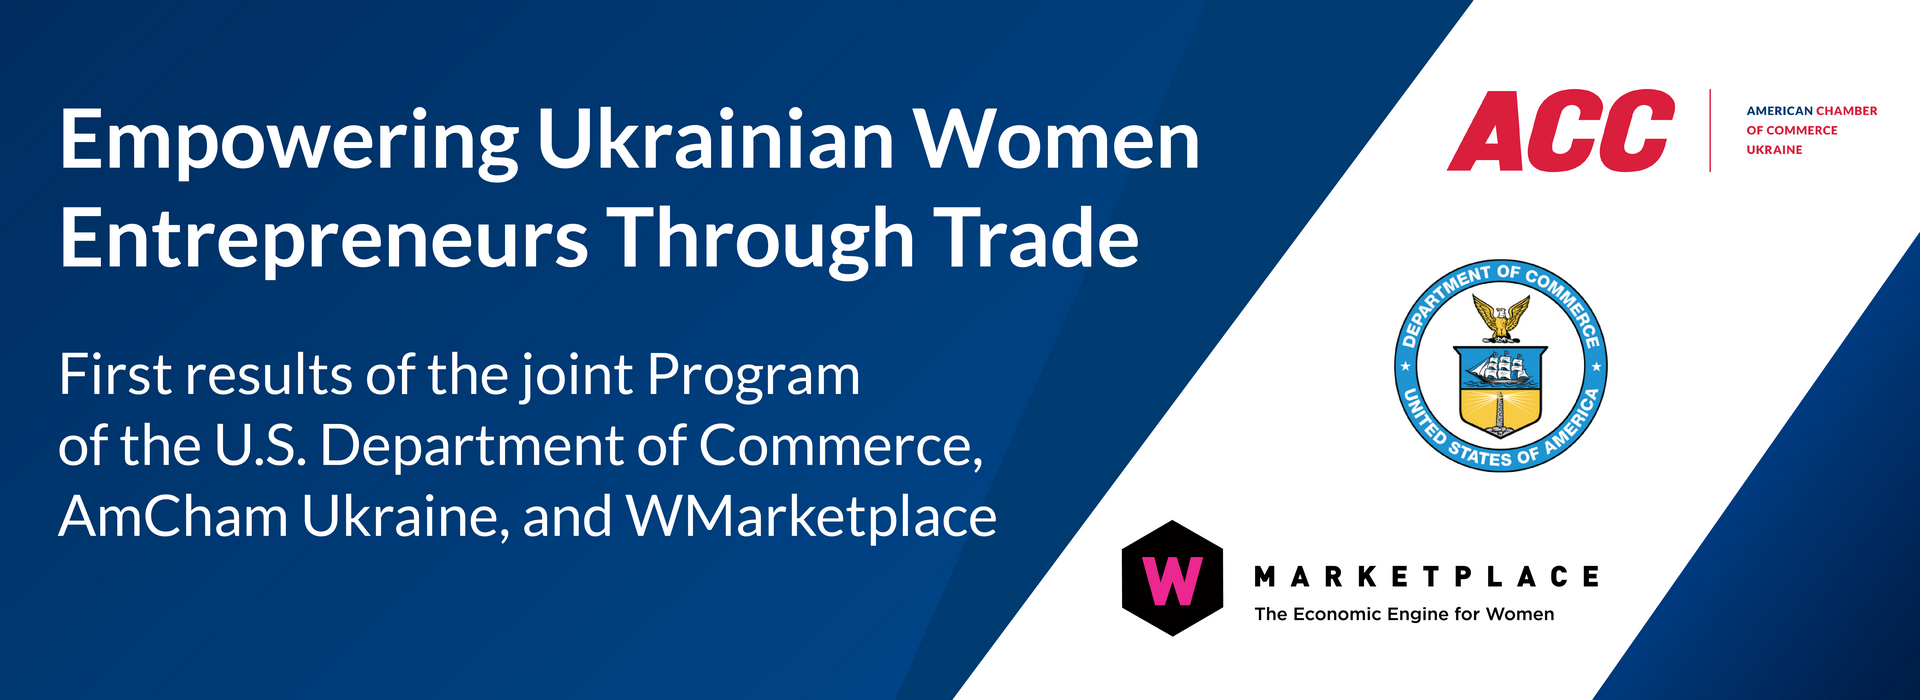 Empowering Ukrainian Women Entrepreneurs Through Trade – first results of the joint Program of the U.S. Department of Commerce, AmCham Ukraine, and WMarketplace